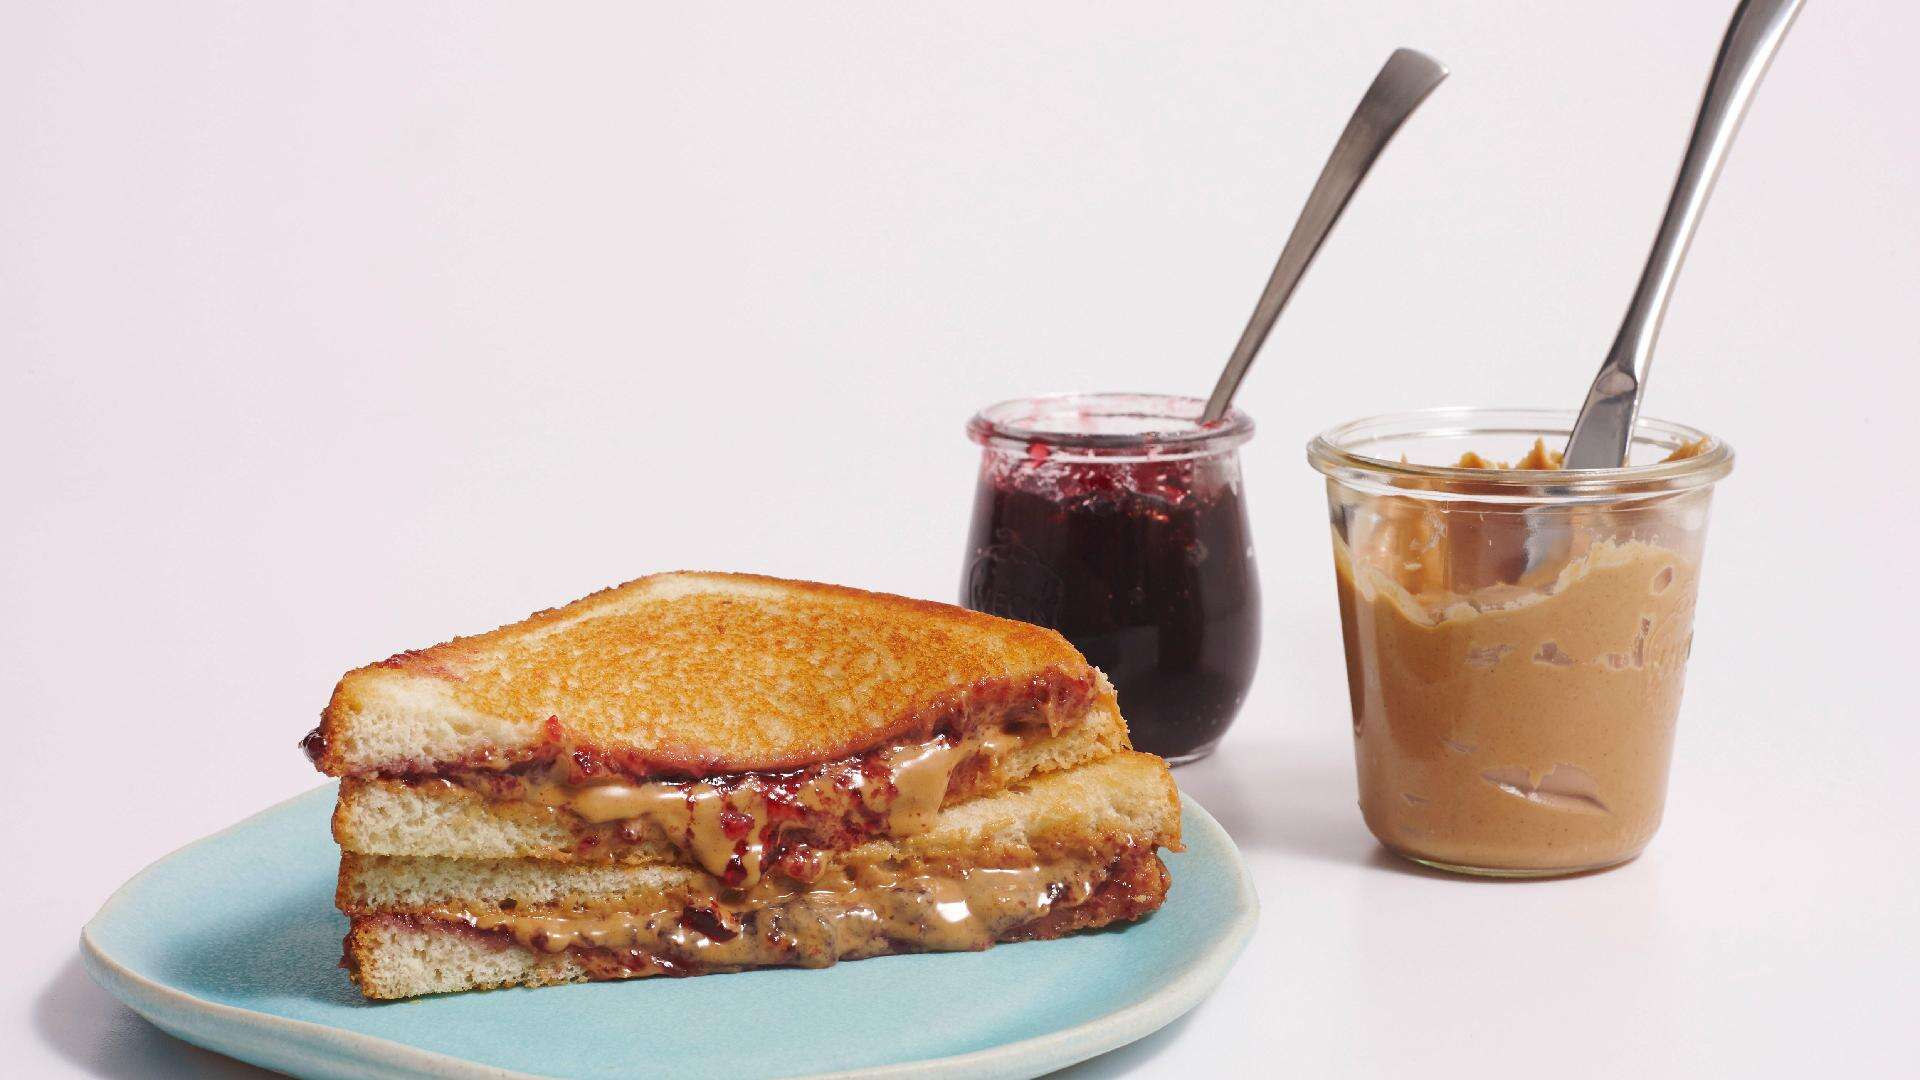 How to Make the Life Changing Peanut Butter & Jelly